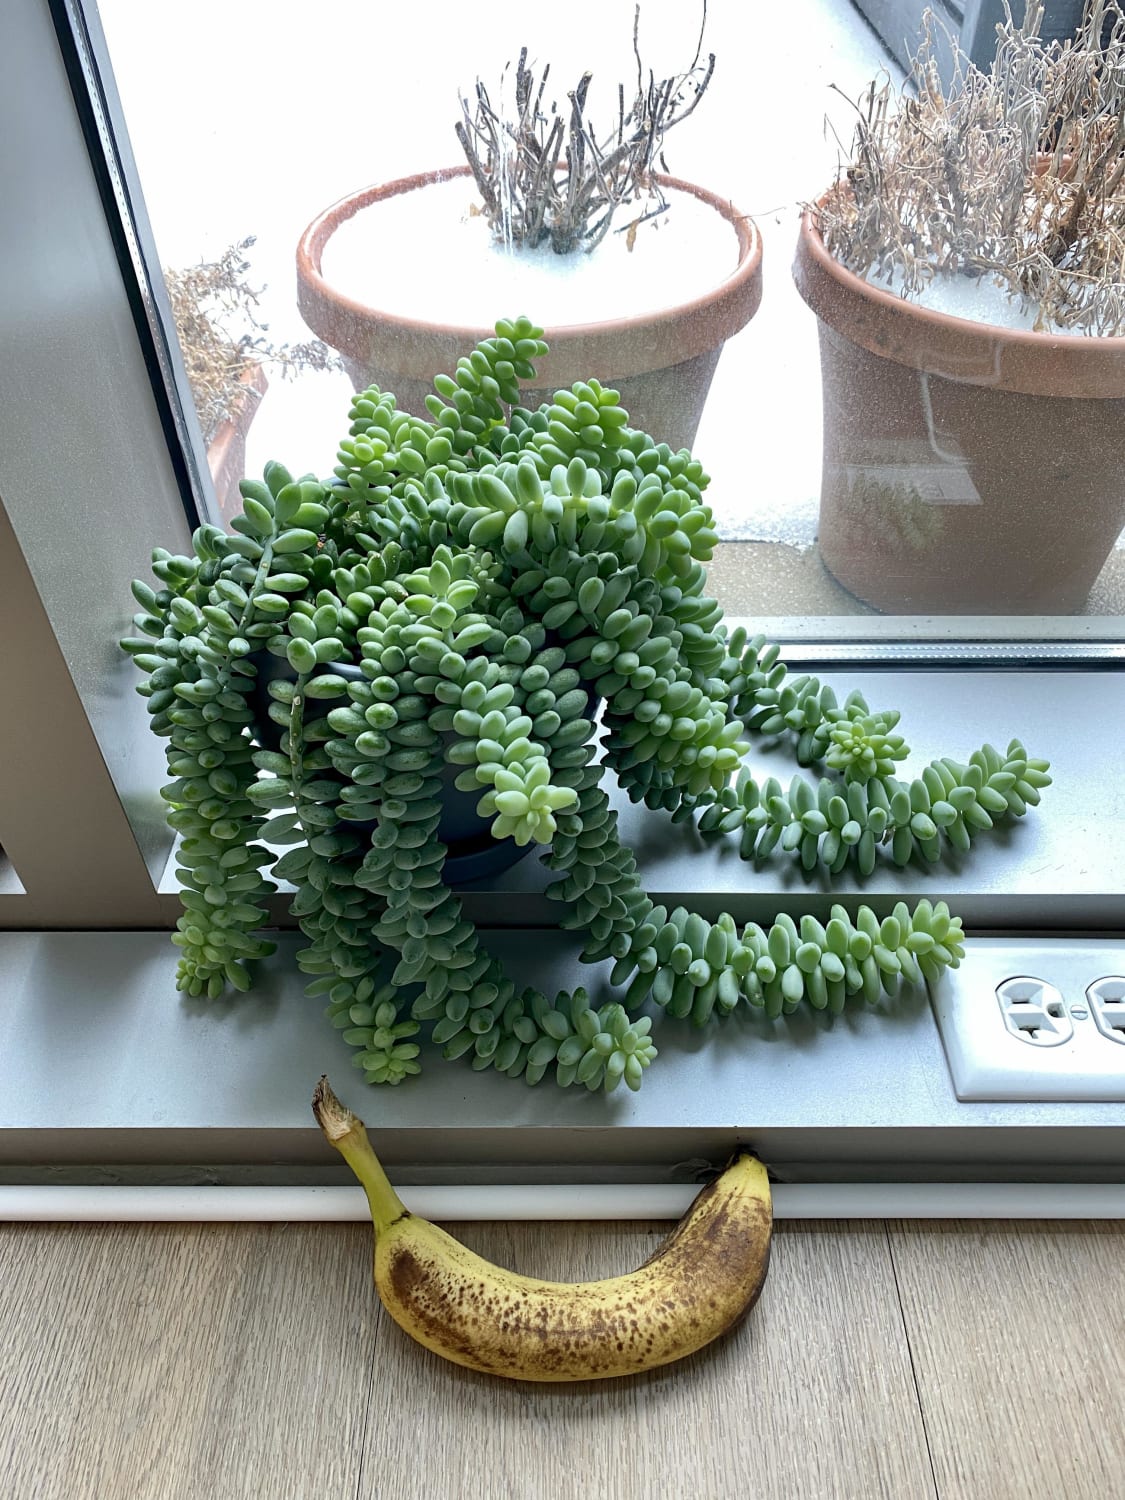 Wanted to share my sedum burrito - brought it home from Home Depot one year ago today when it was just a tiny little thing! Banana for scale.